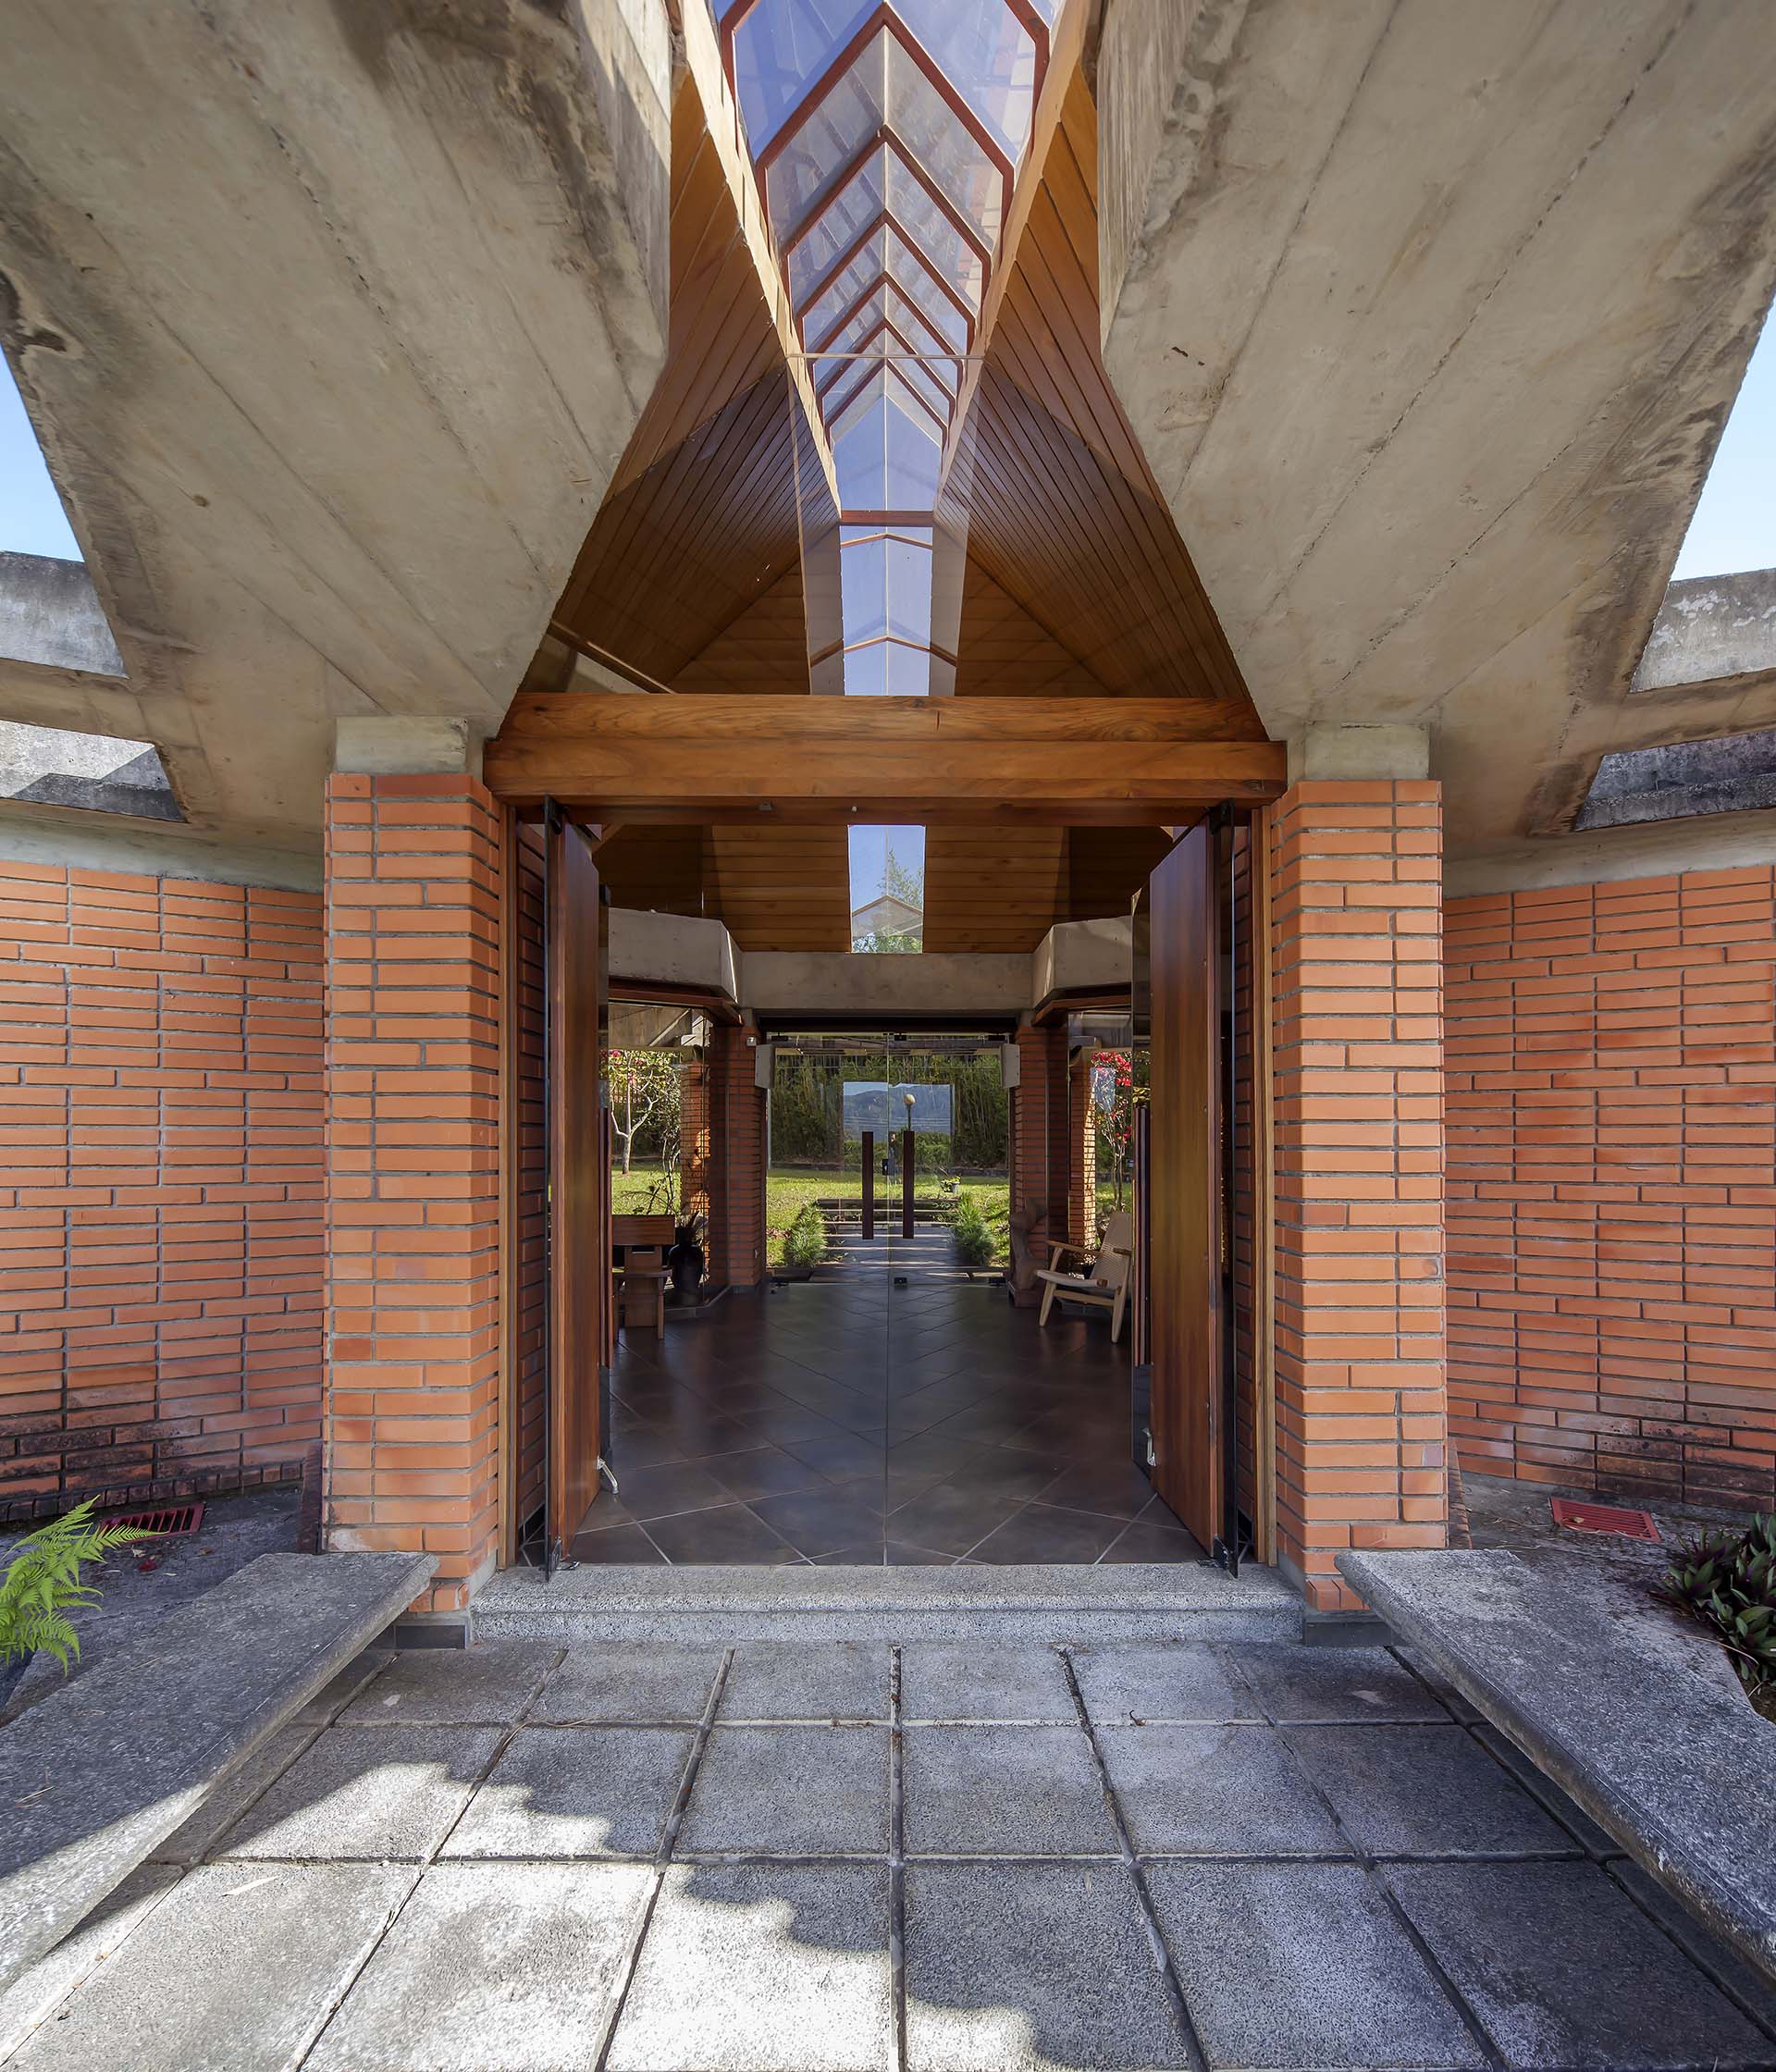 Close-up view of Soto House's main entrance, showcasing open doors leading into the lobby. Visible details include concrete walls, cantilevered concrete beams, and an axial skylight.